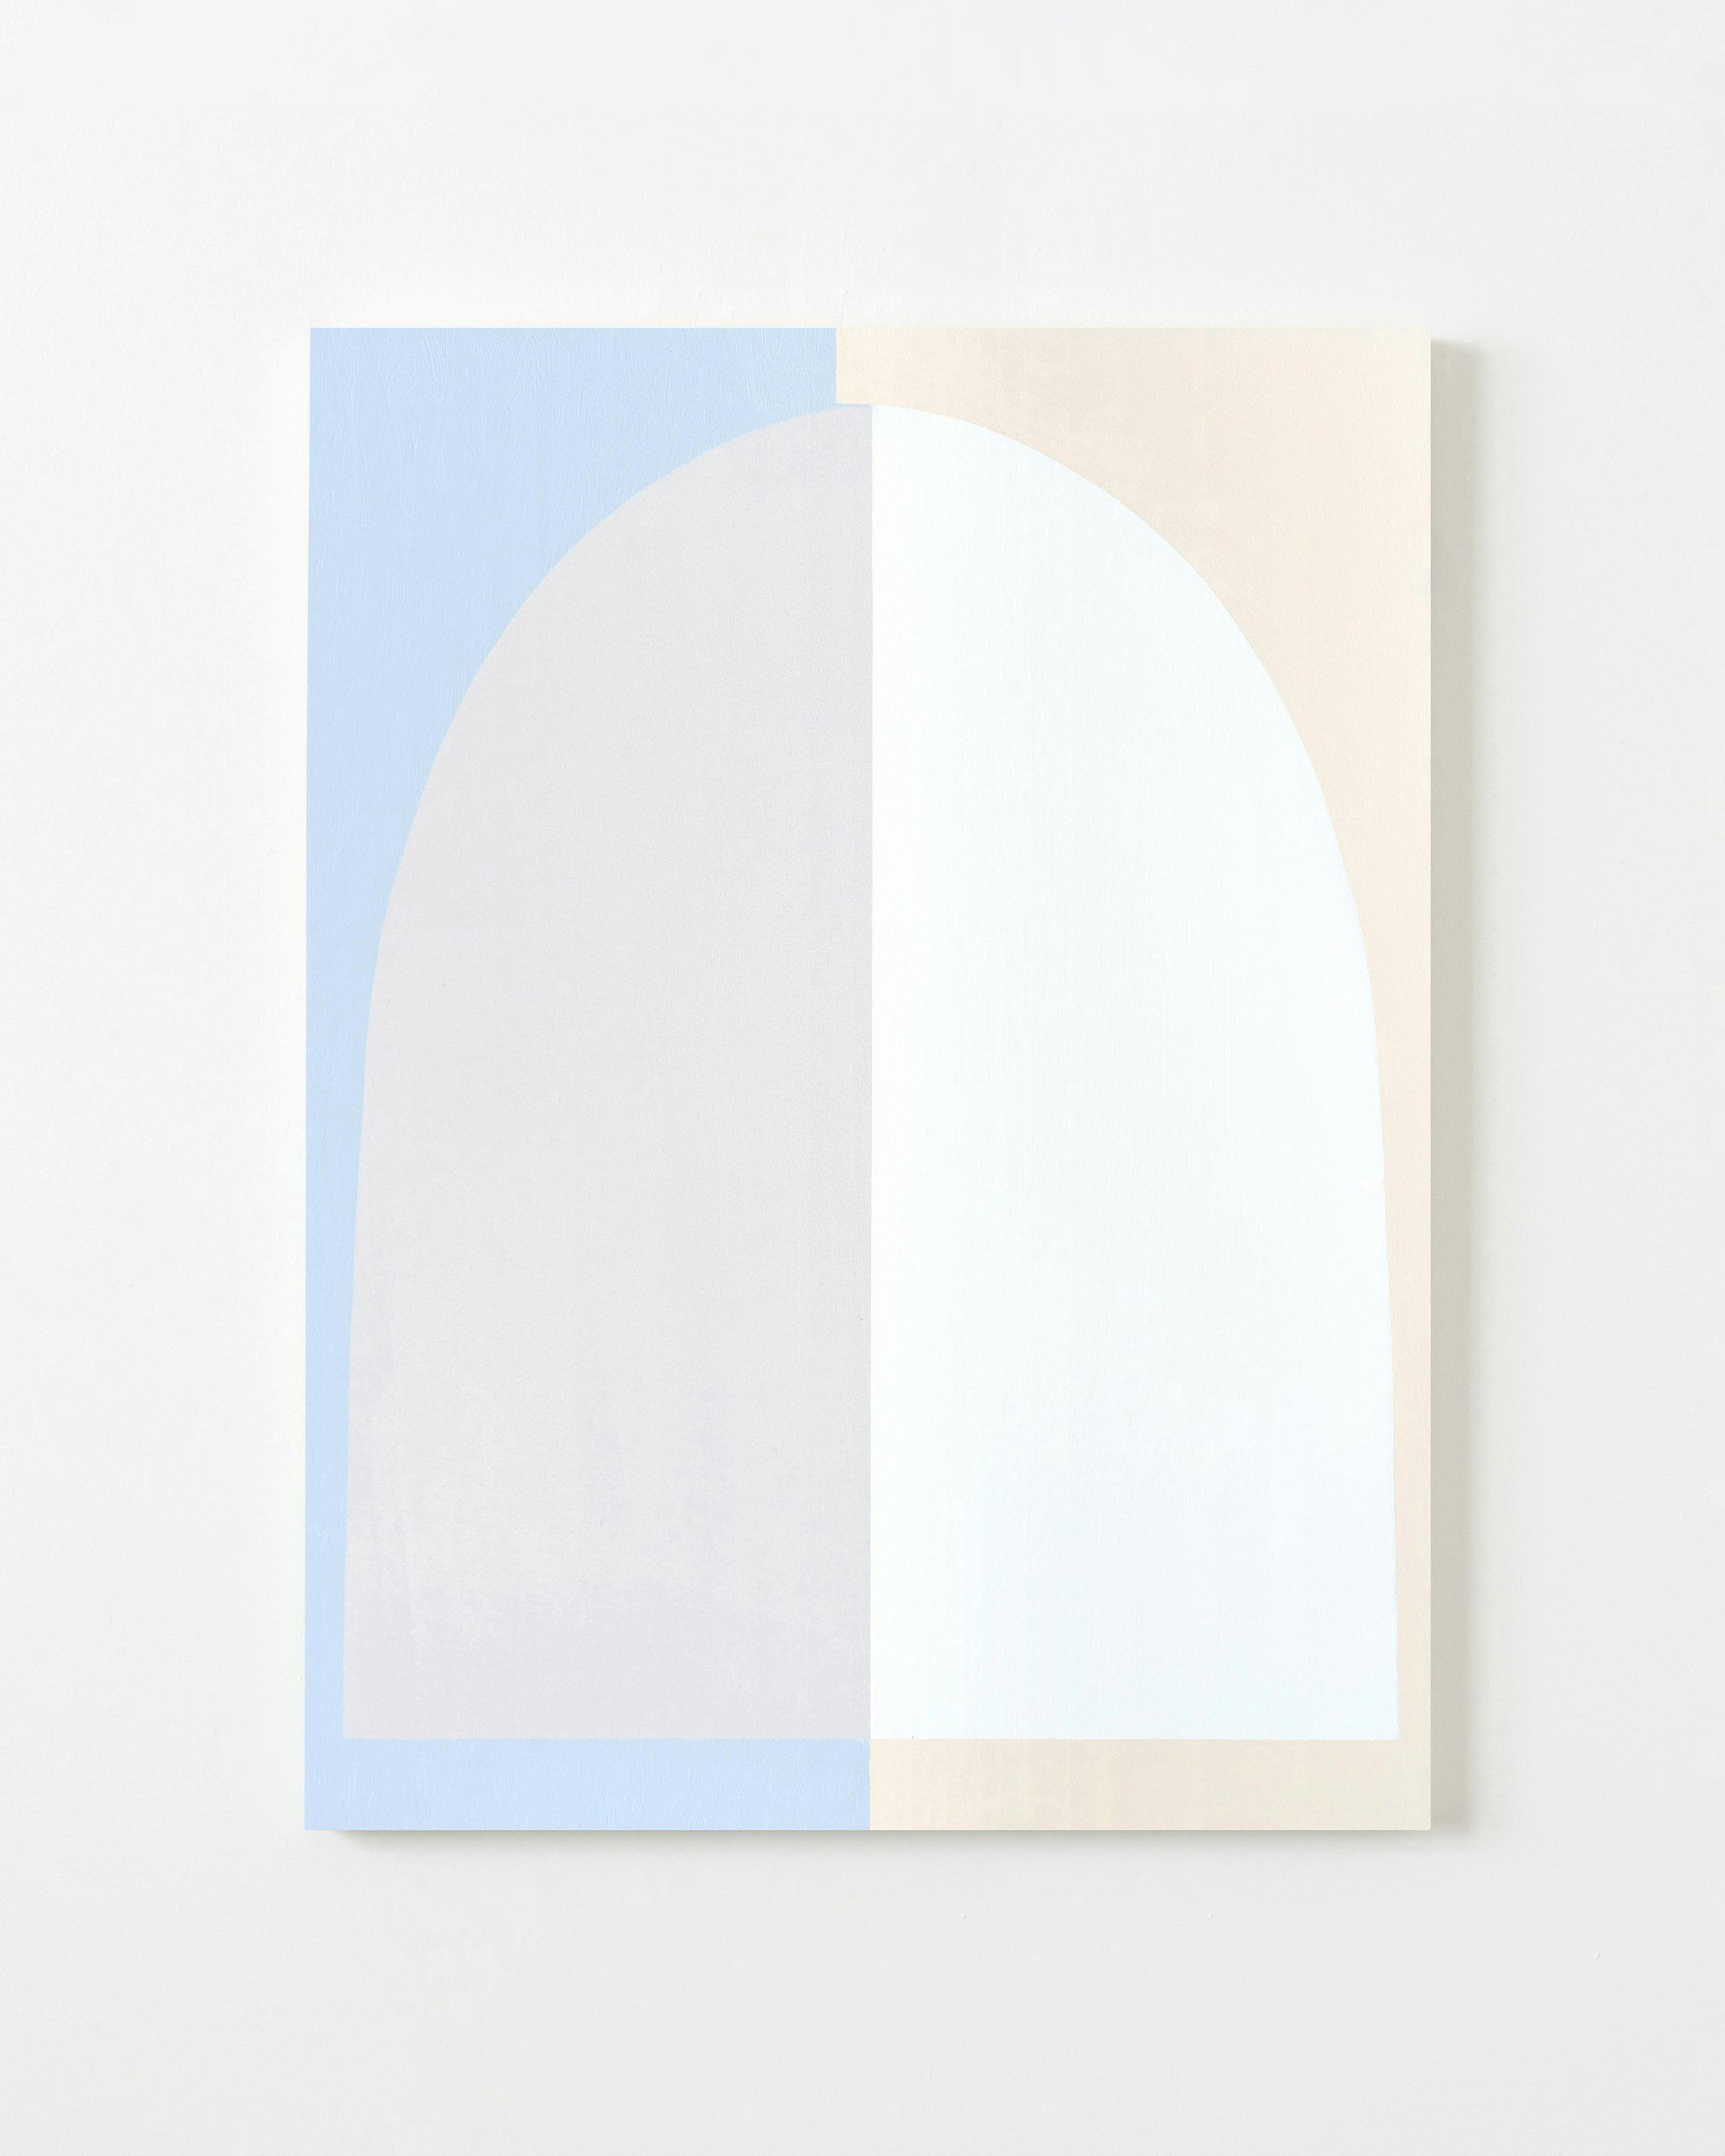 Painting by Aschely Vaughan Cone titled "Arch in Blue Shadow".